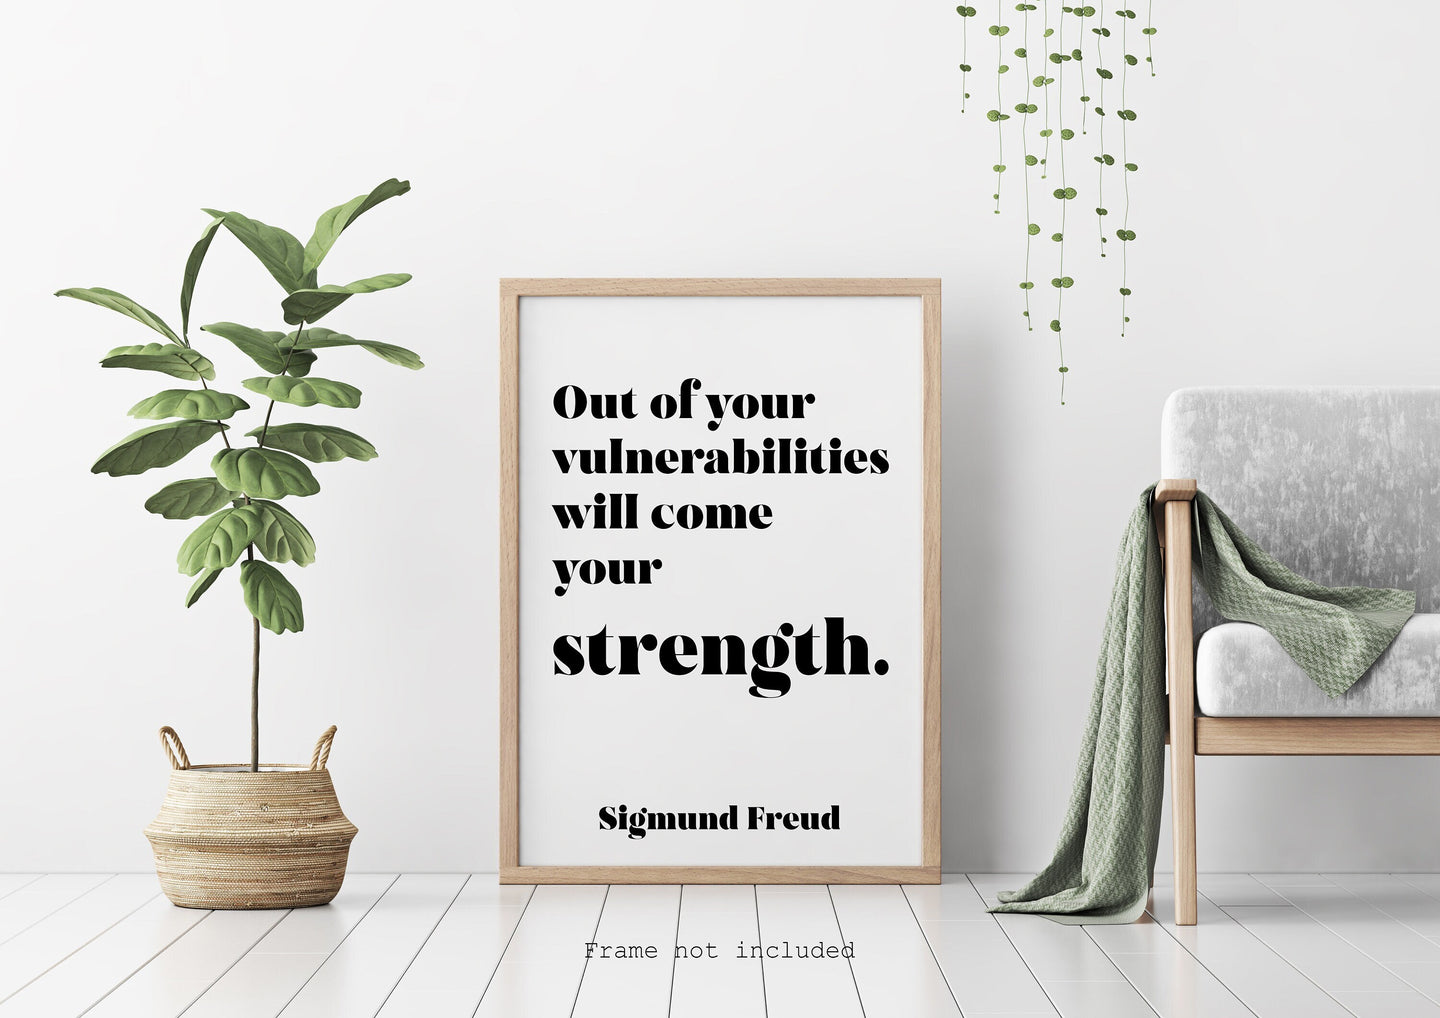 Sigmund Freud quote - Out of your vulnerabilities will come your strength - psychology wall art - office decor - unframed print